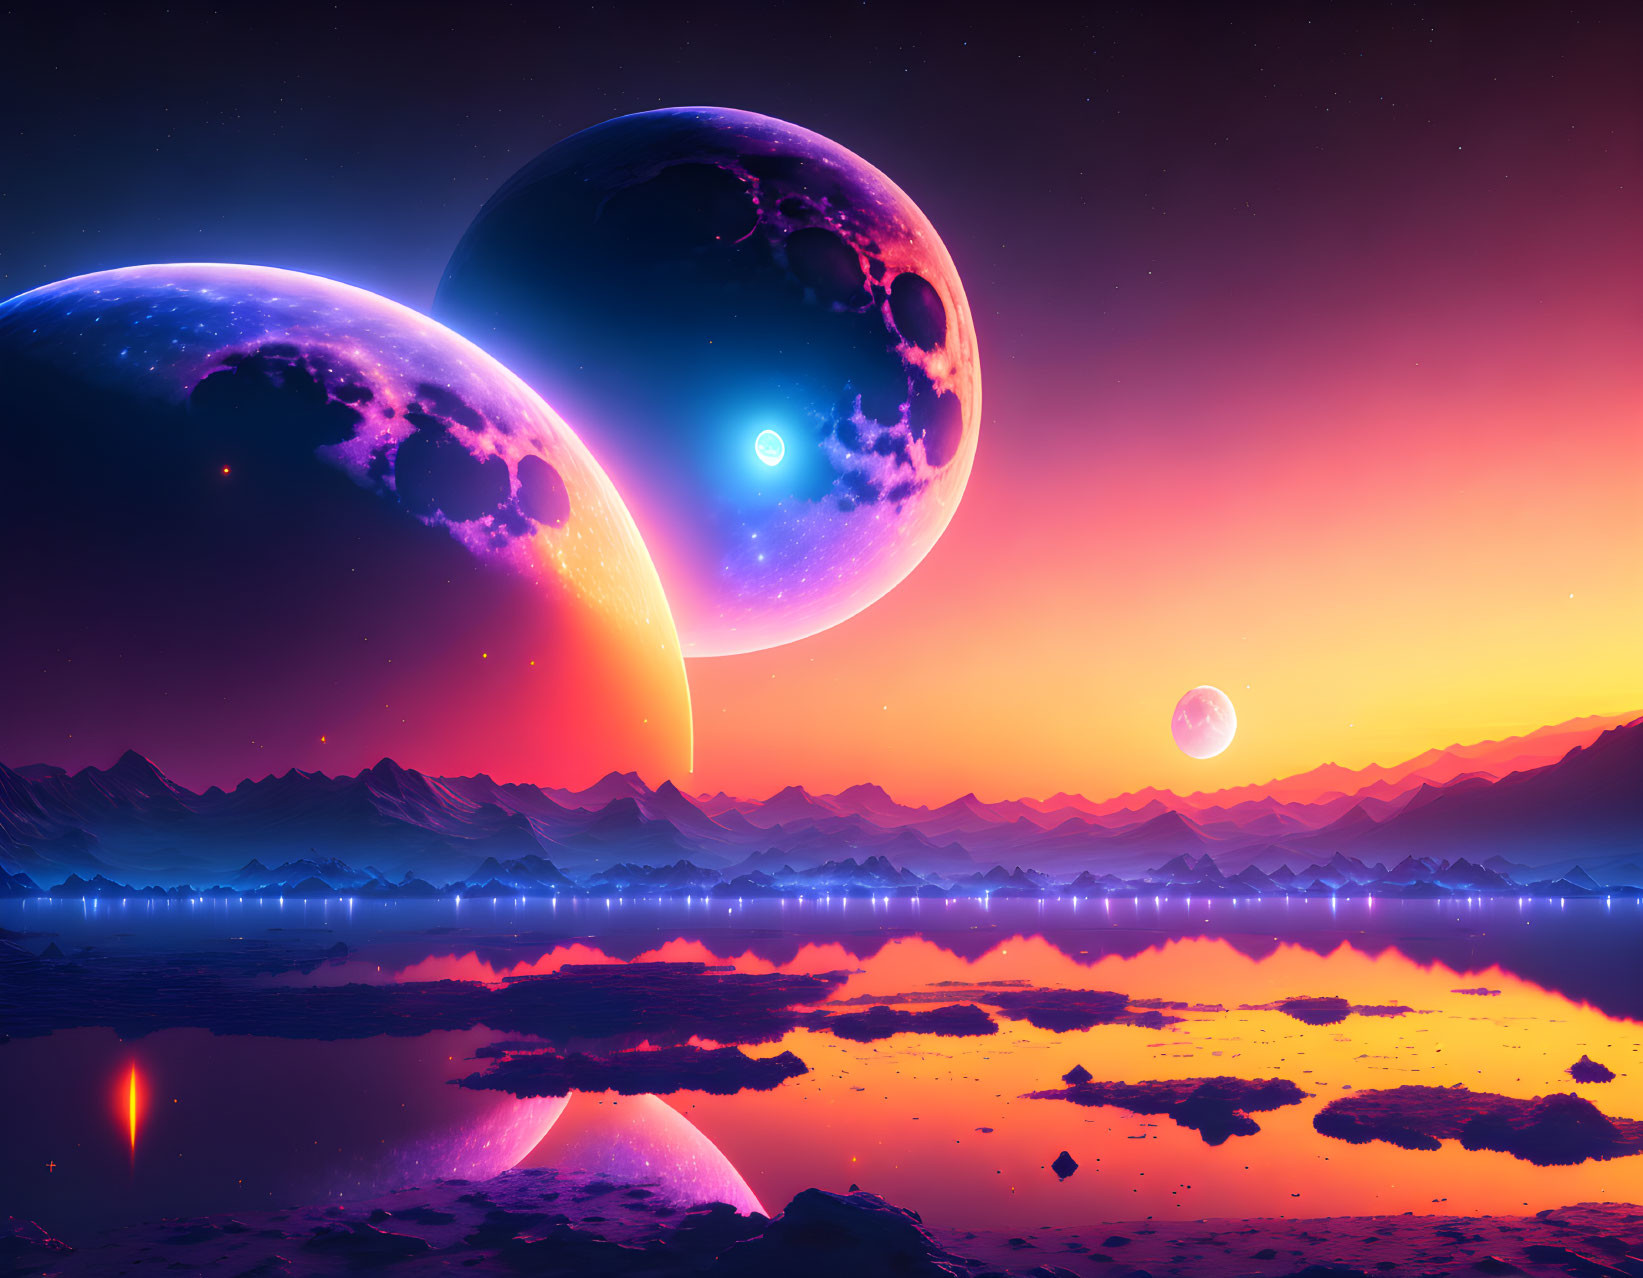 Surreal landscape with celestial bodies reflected in water